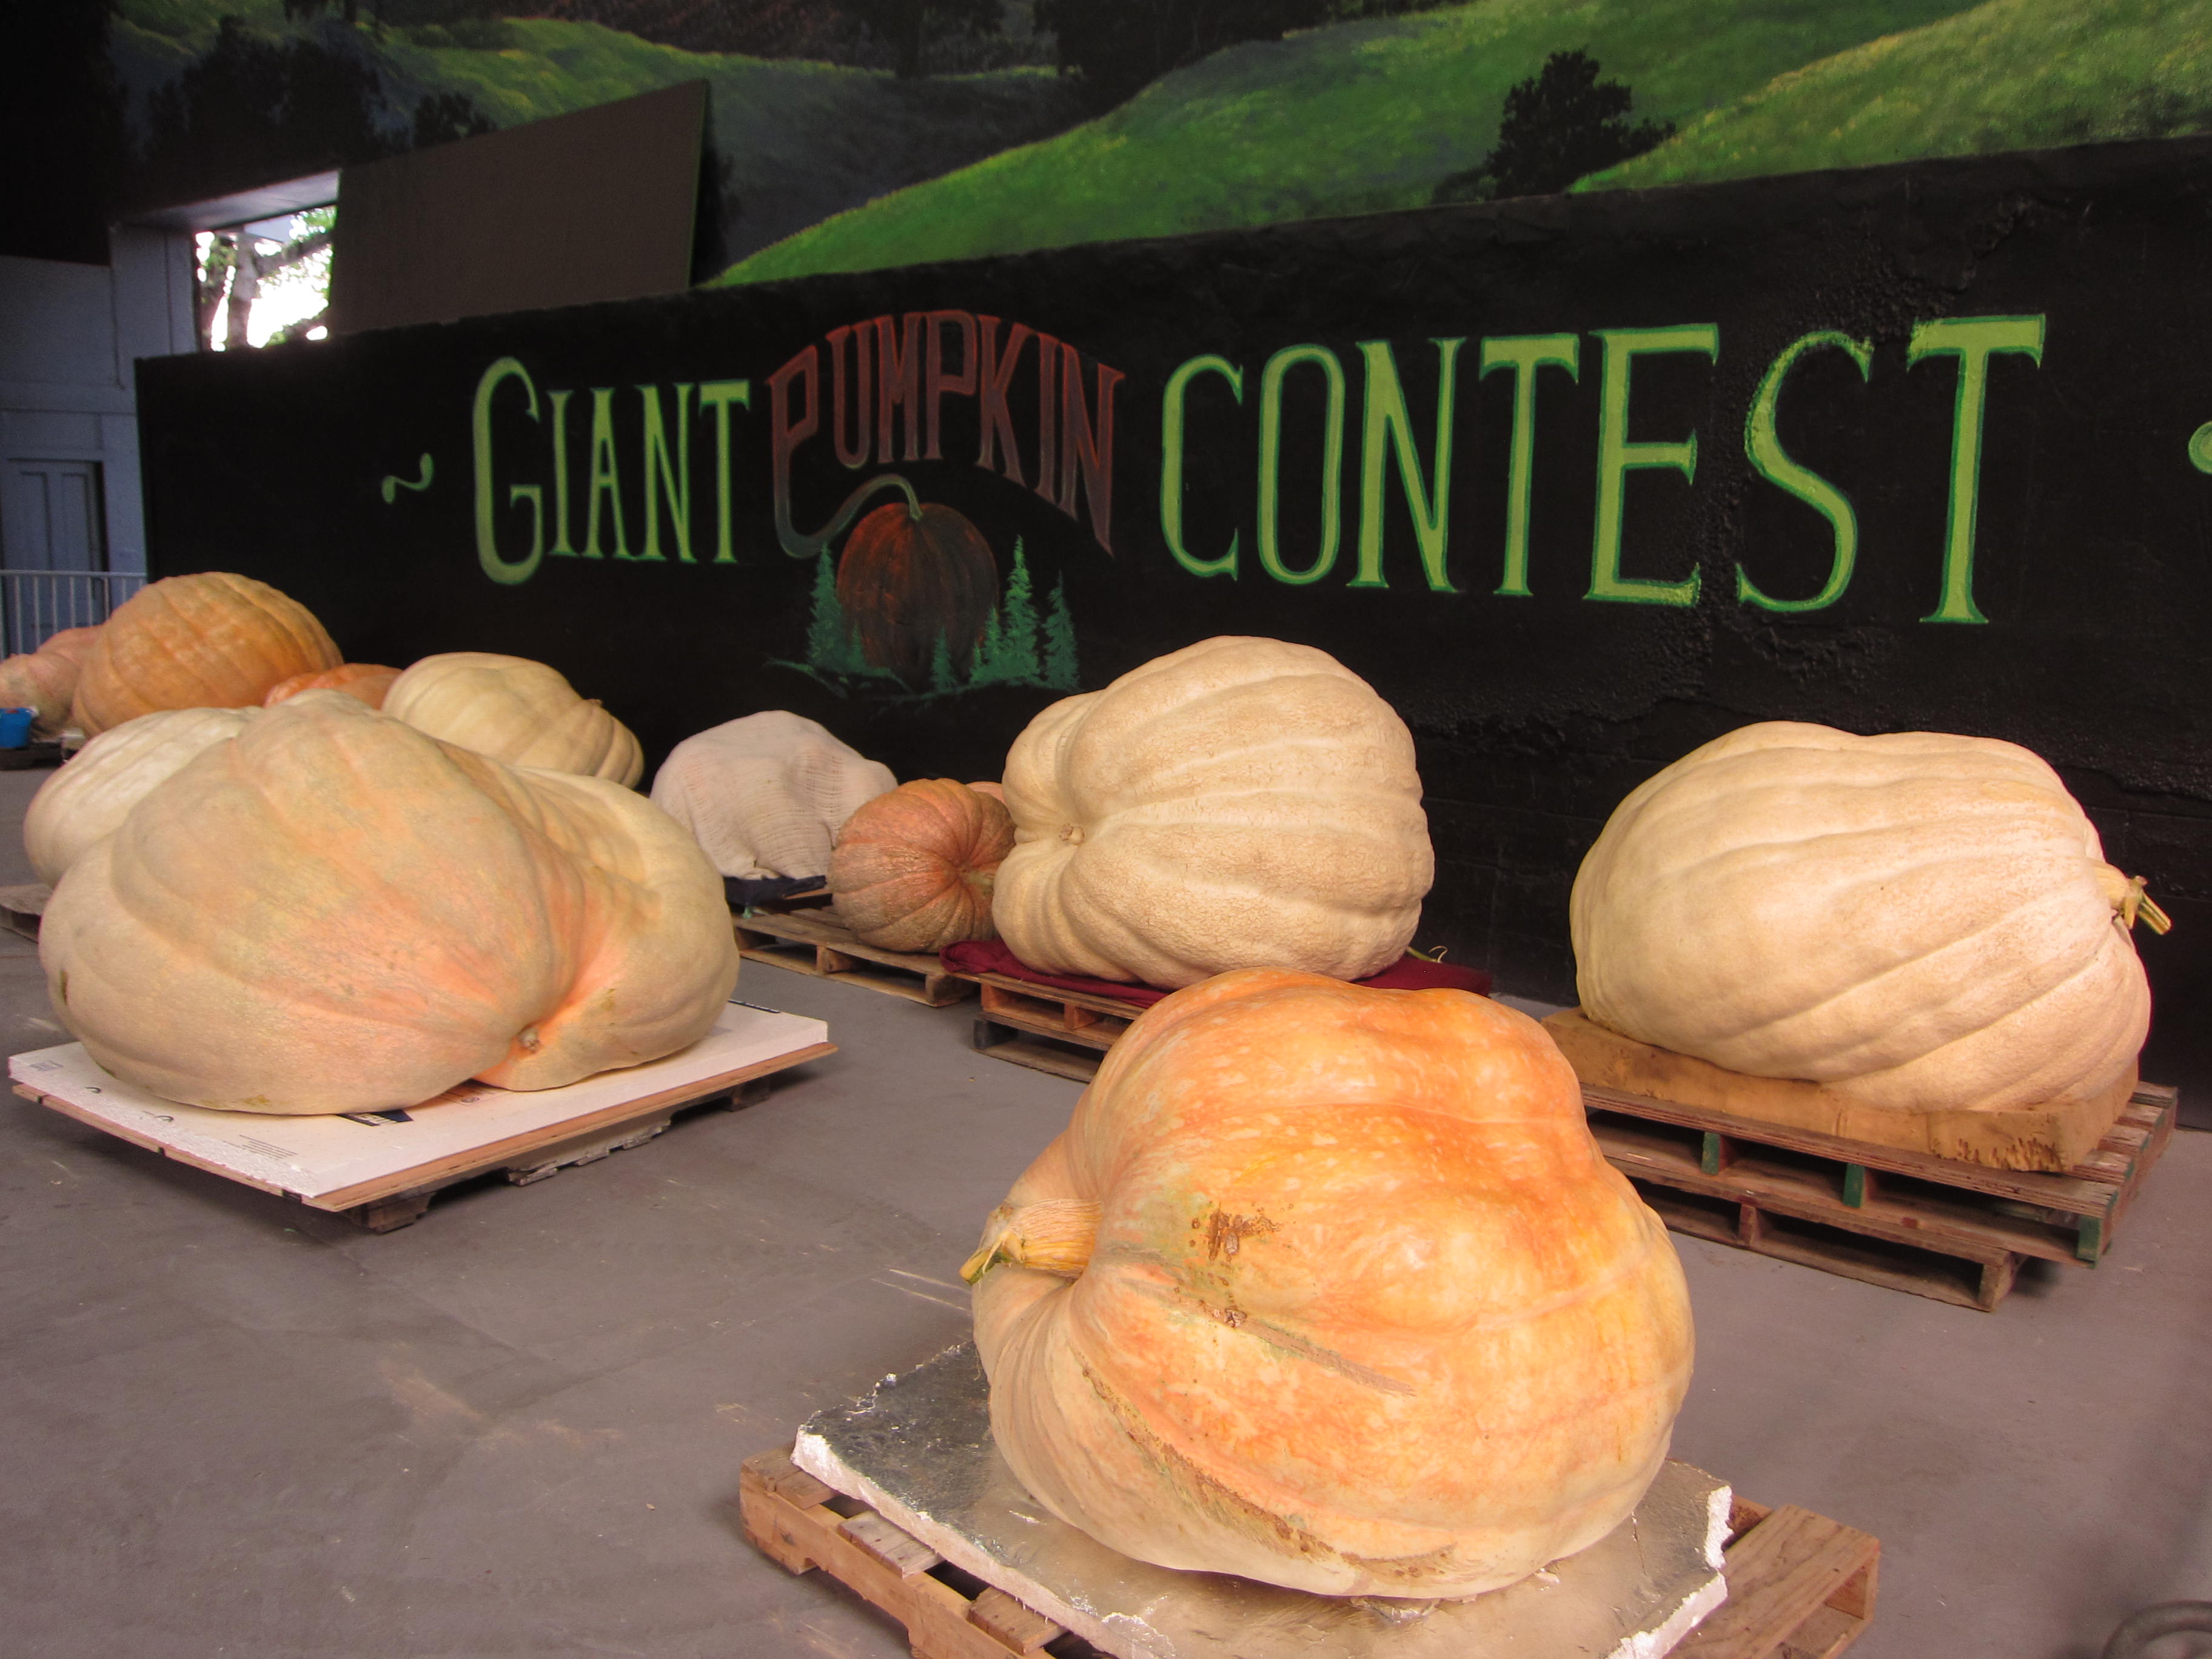 It's not a fair without the giant pumpkin contest.